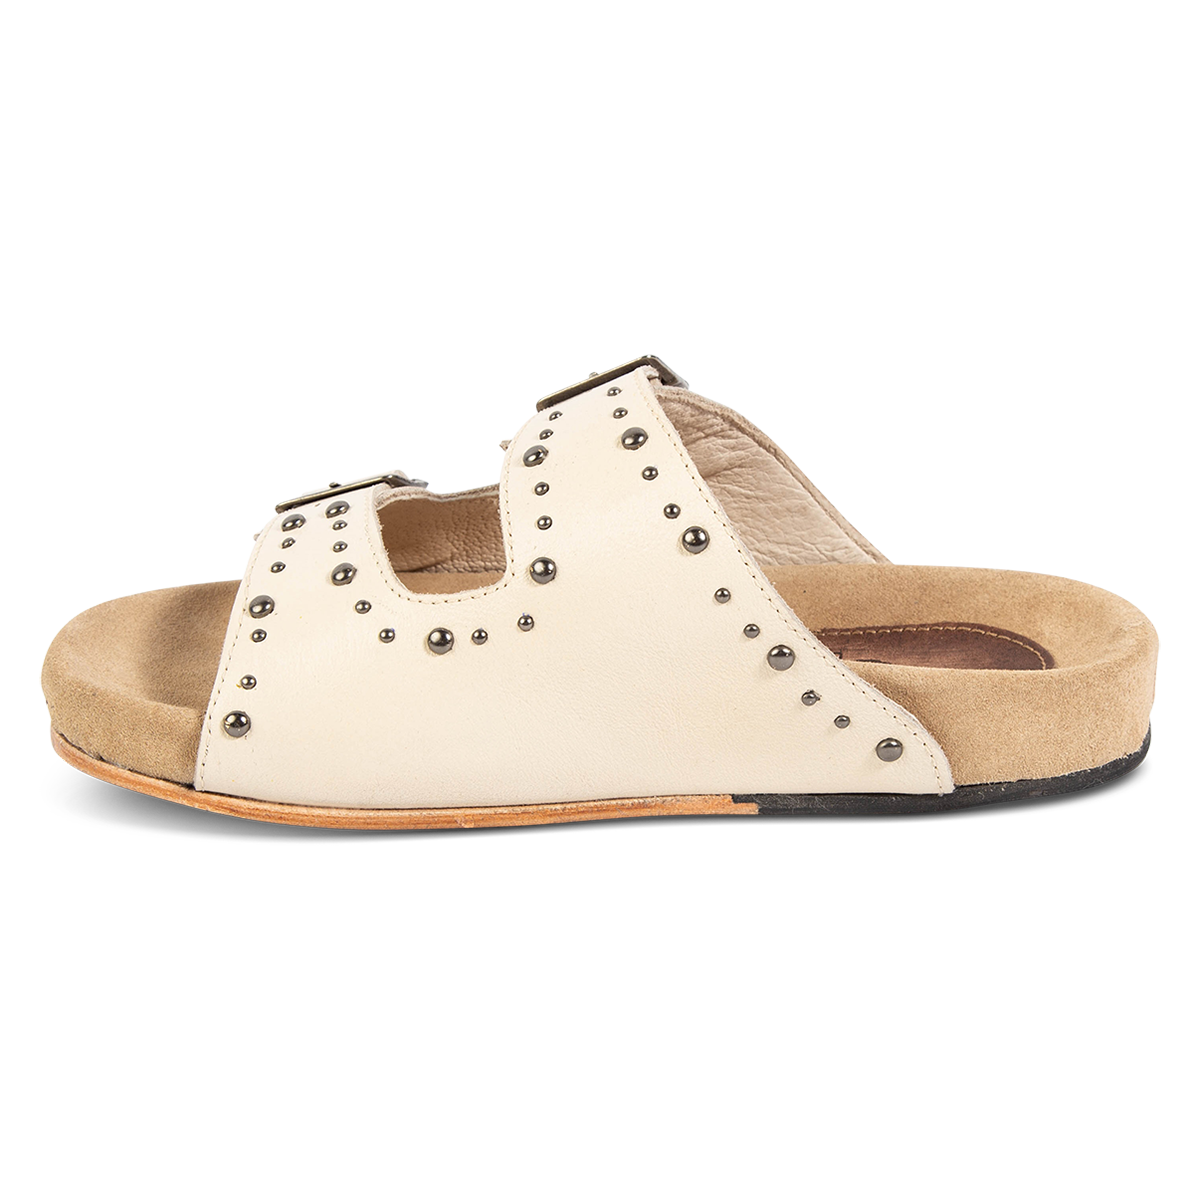 Inside view showing FREEBIRD women's Asher bone sandal with adjustable belt buckles, a suede footbed and silver embellishments